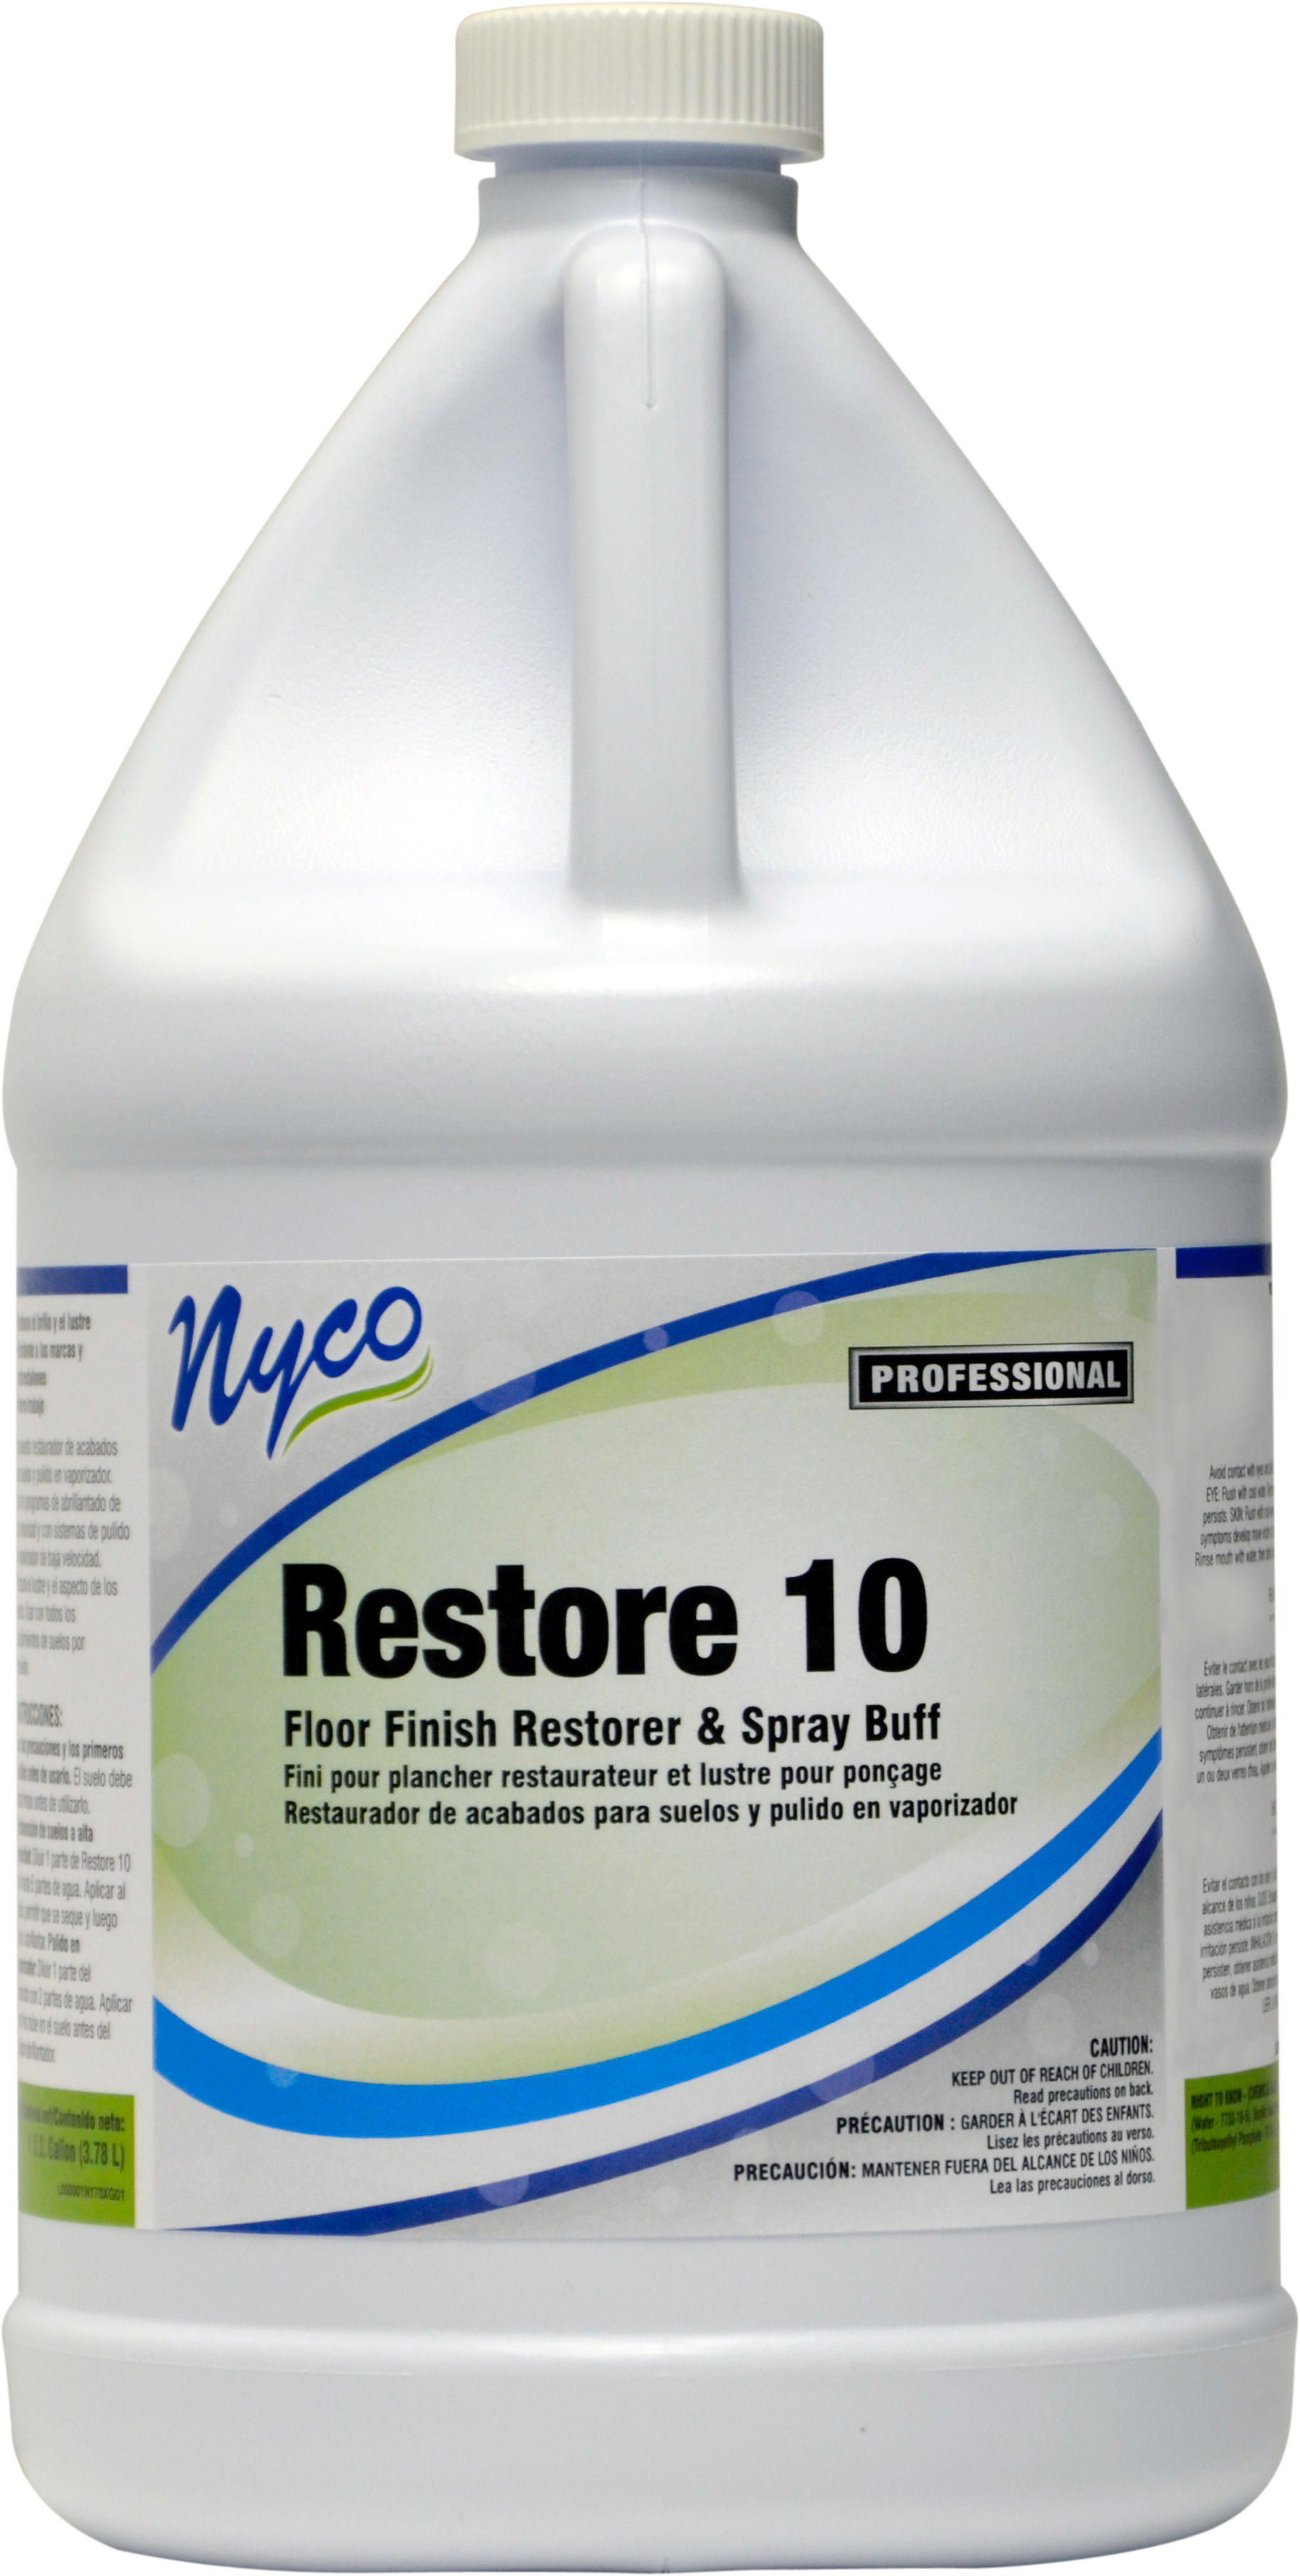 https://www.nycoproducts.com/wp-content/uploads/2016/07/NL170-G4_Restore-10-1.png